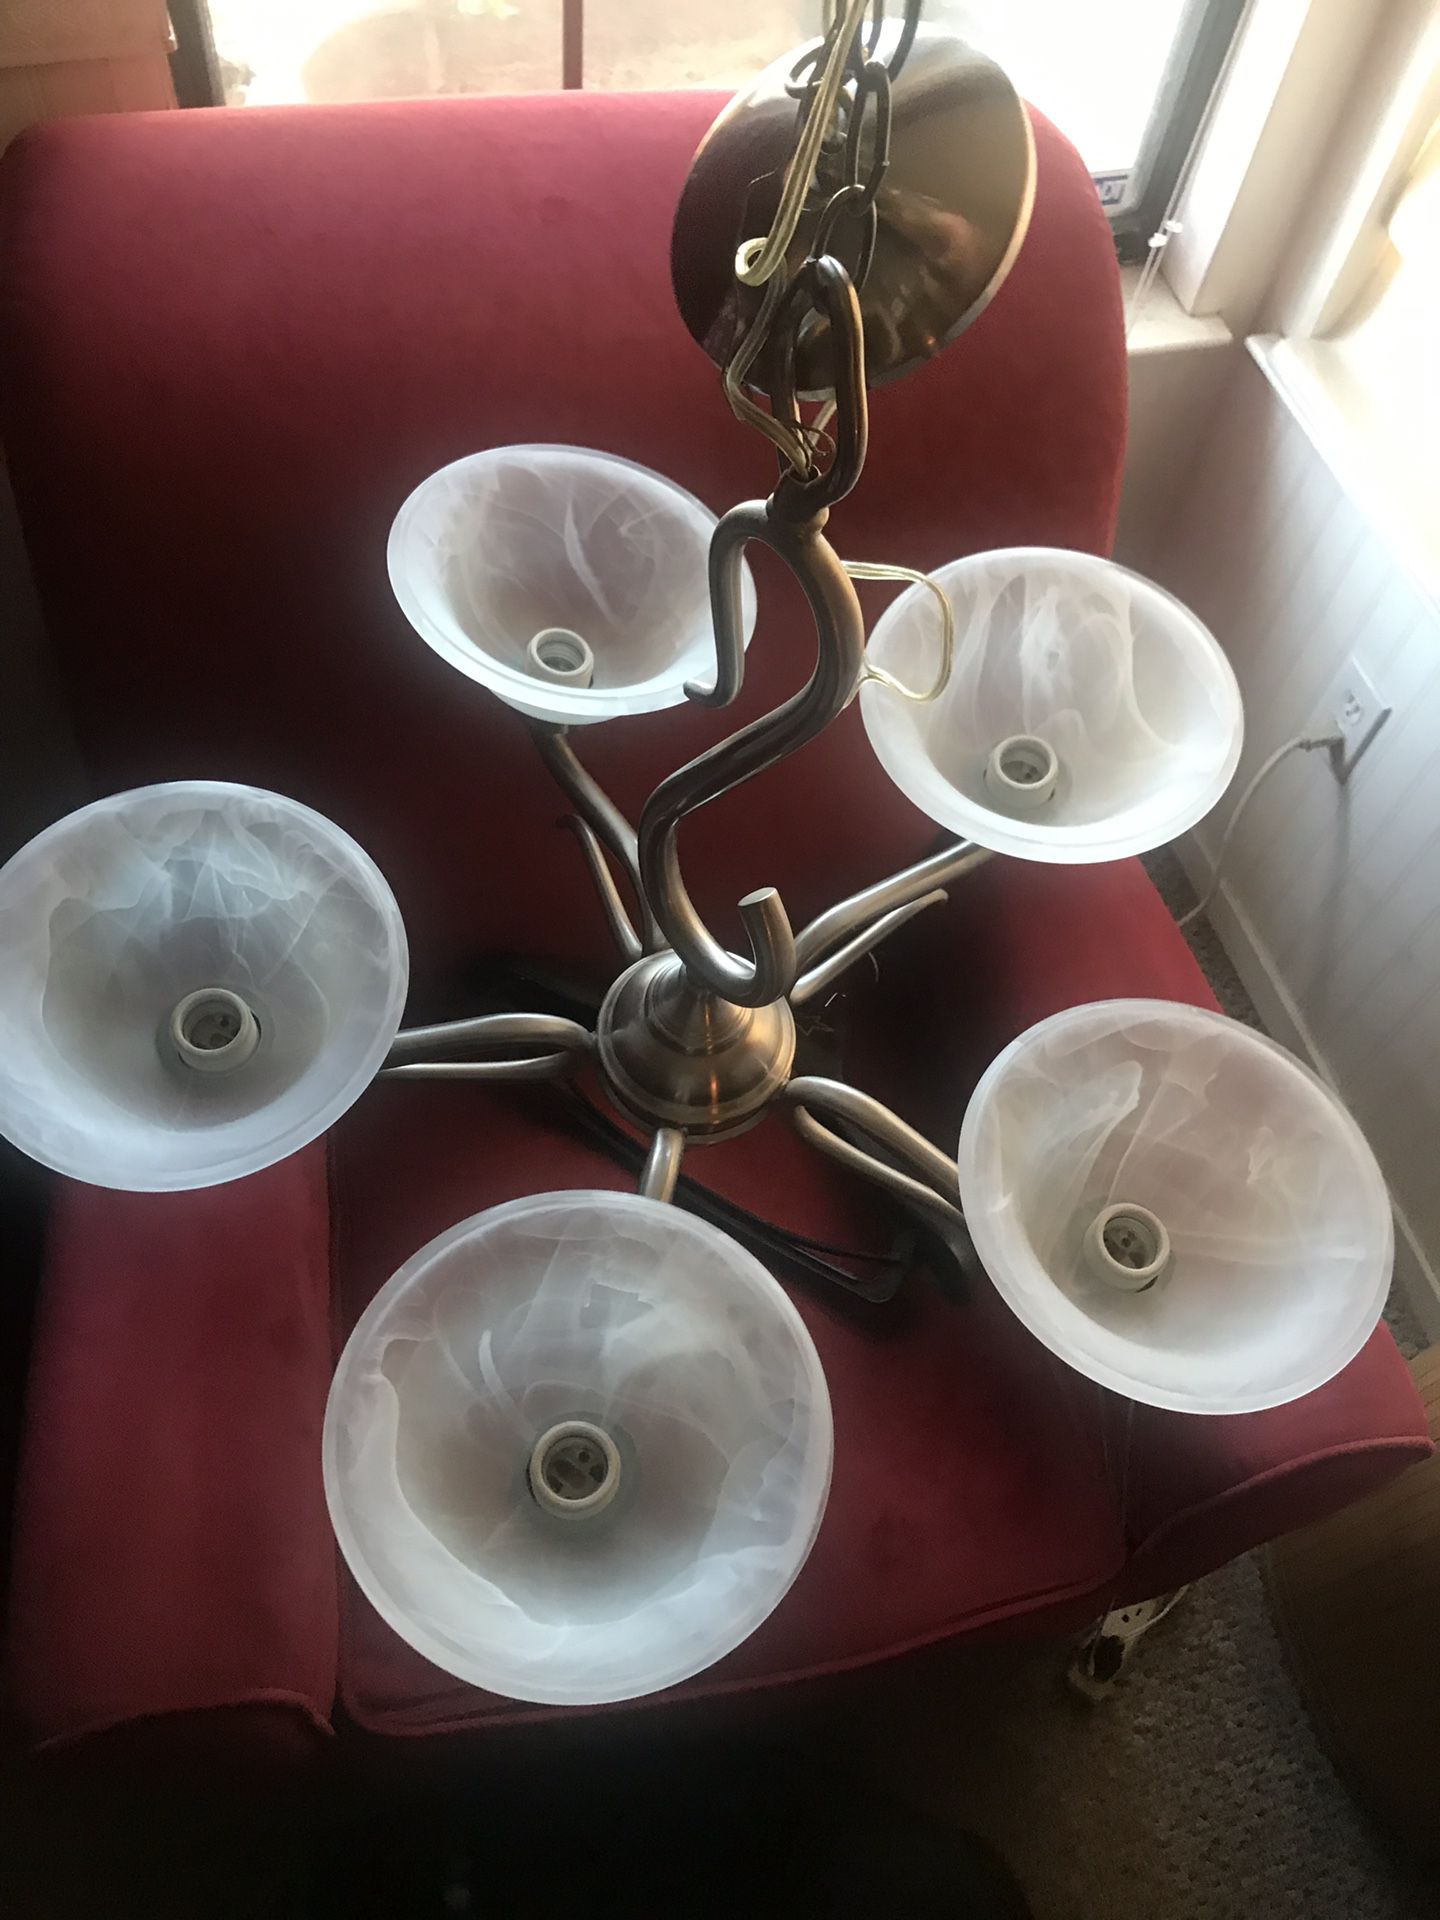 Hanging light fixture with 5 lights